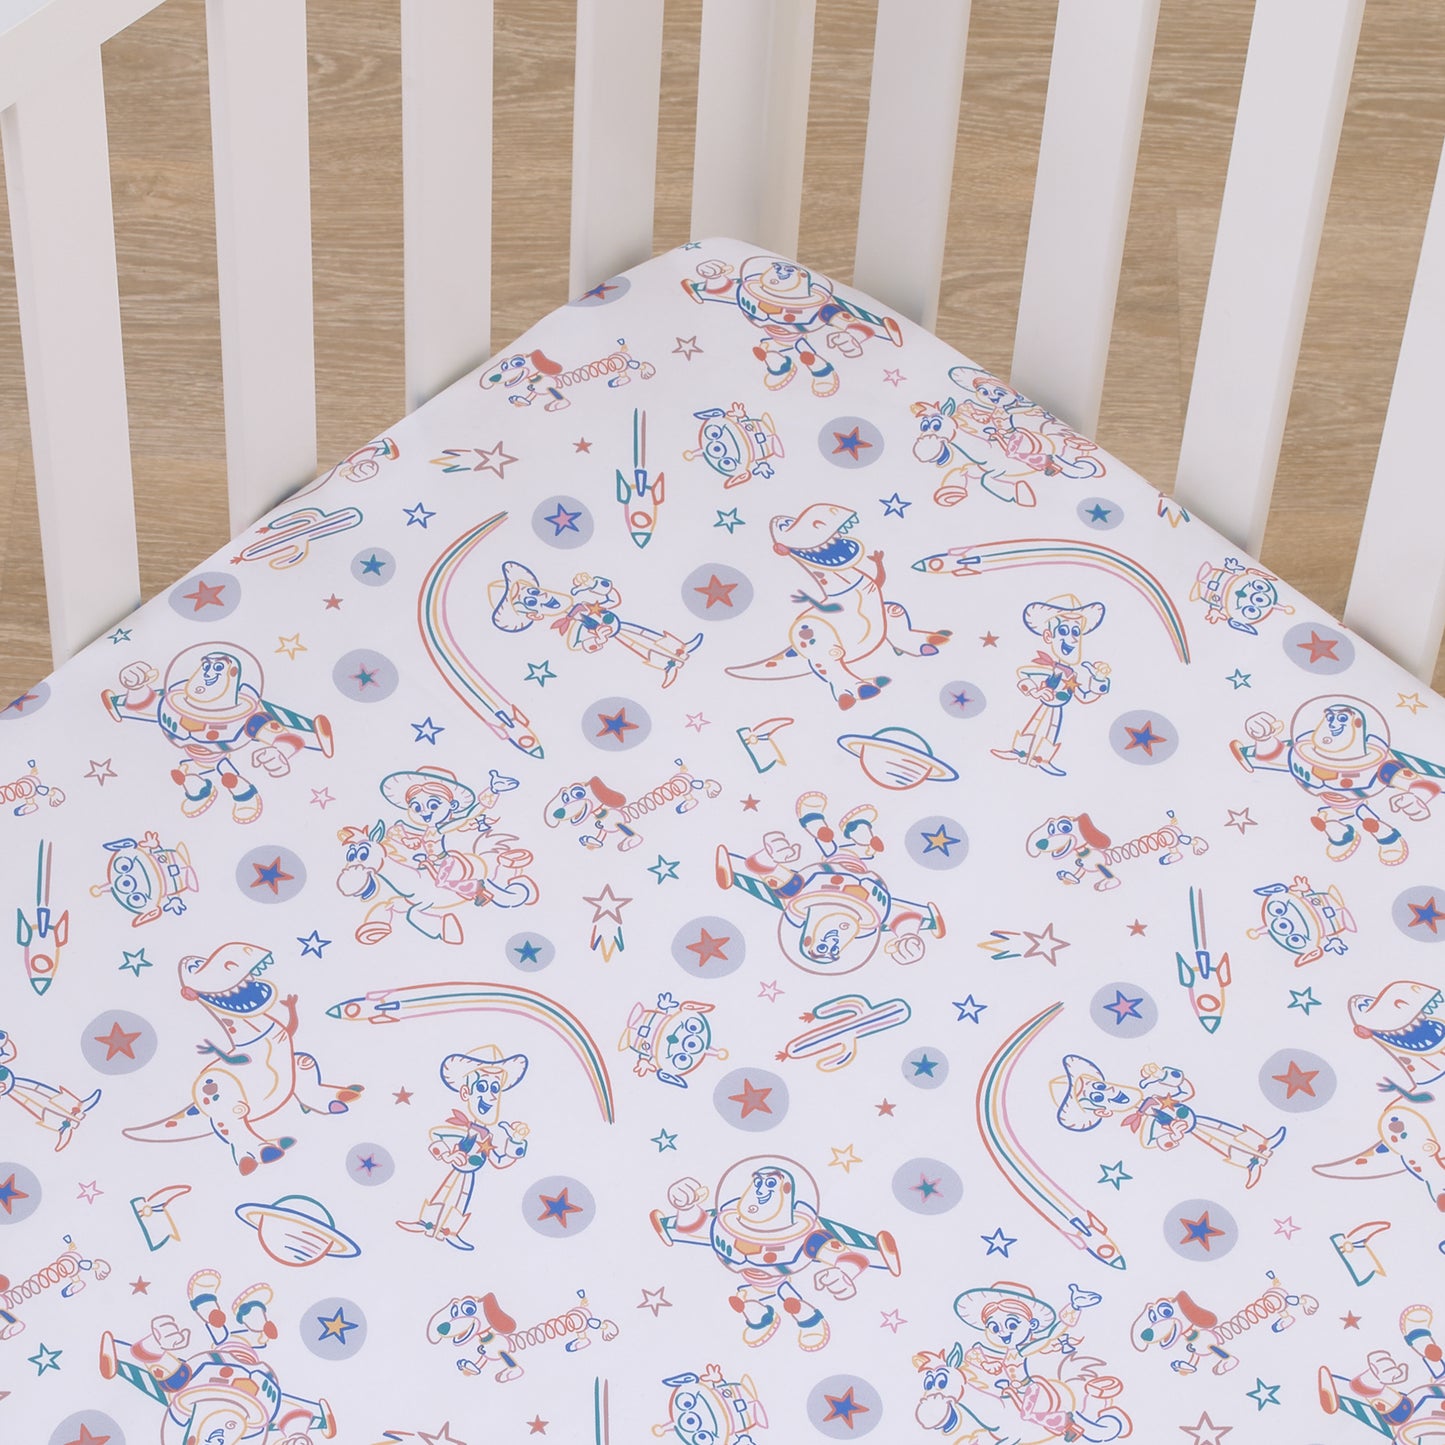 Disney Toy Story Blue, Orange, and White, Woody, Buzz, and Jessie Super Soft Nursery Fitted Crib Sheet